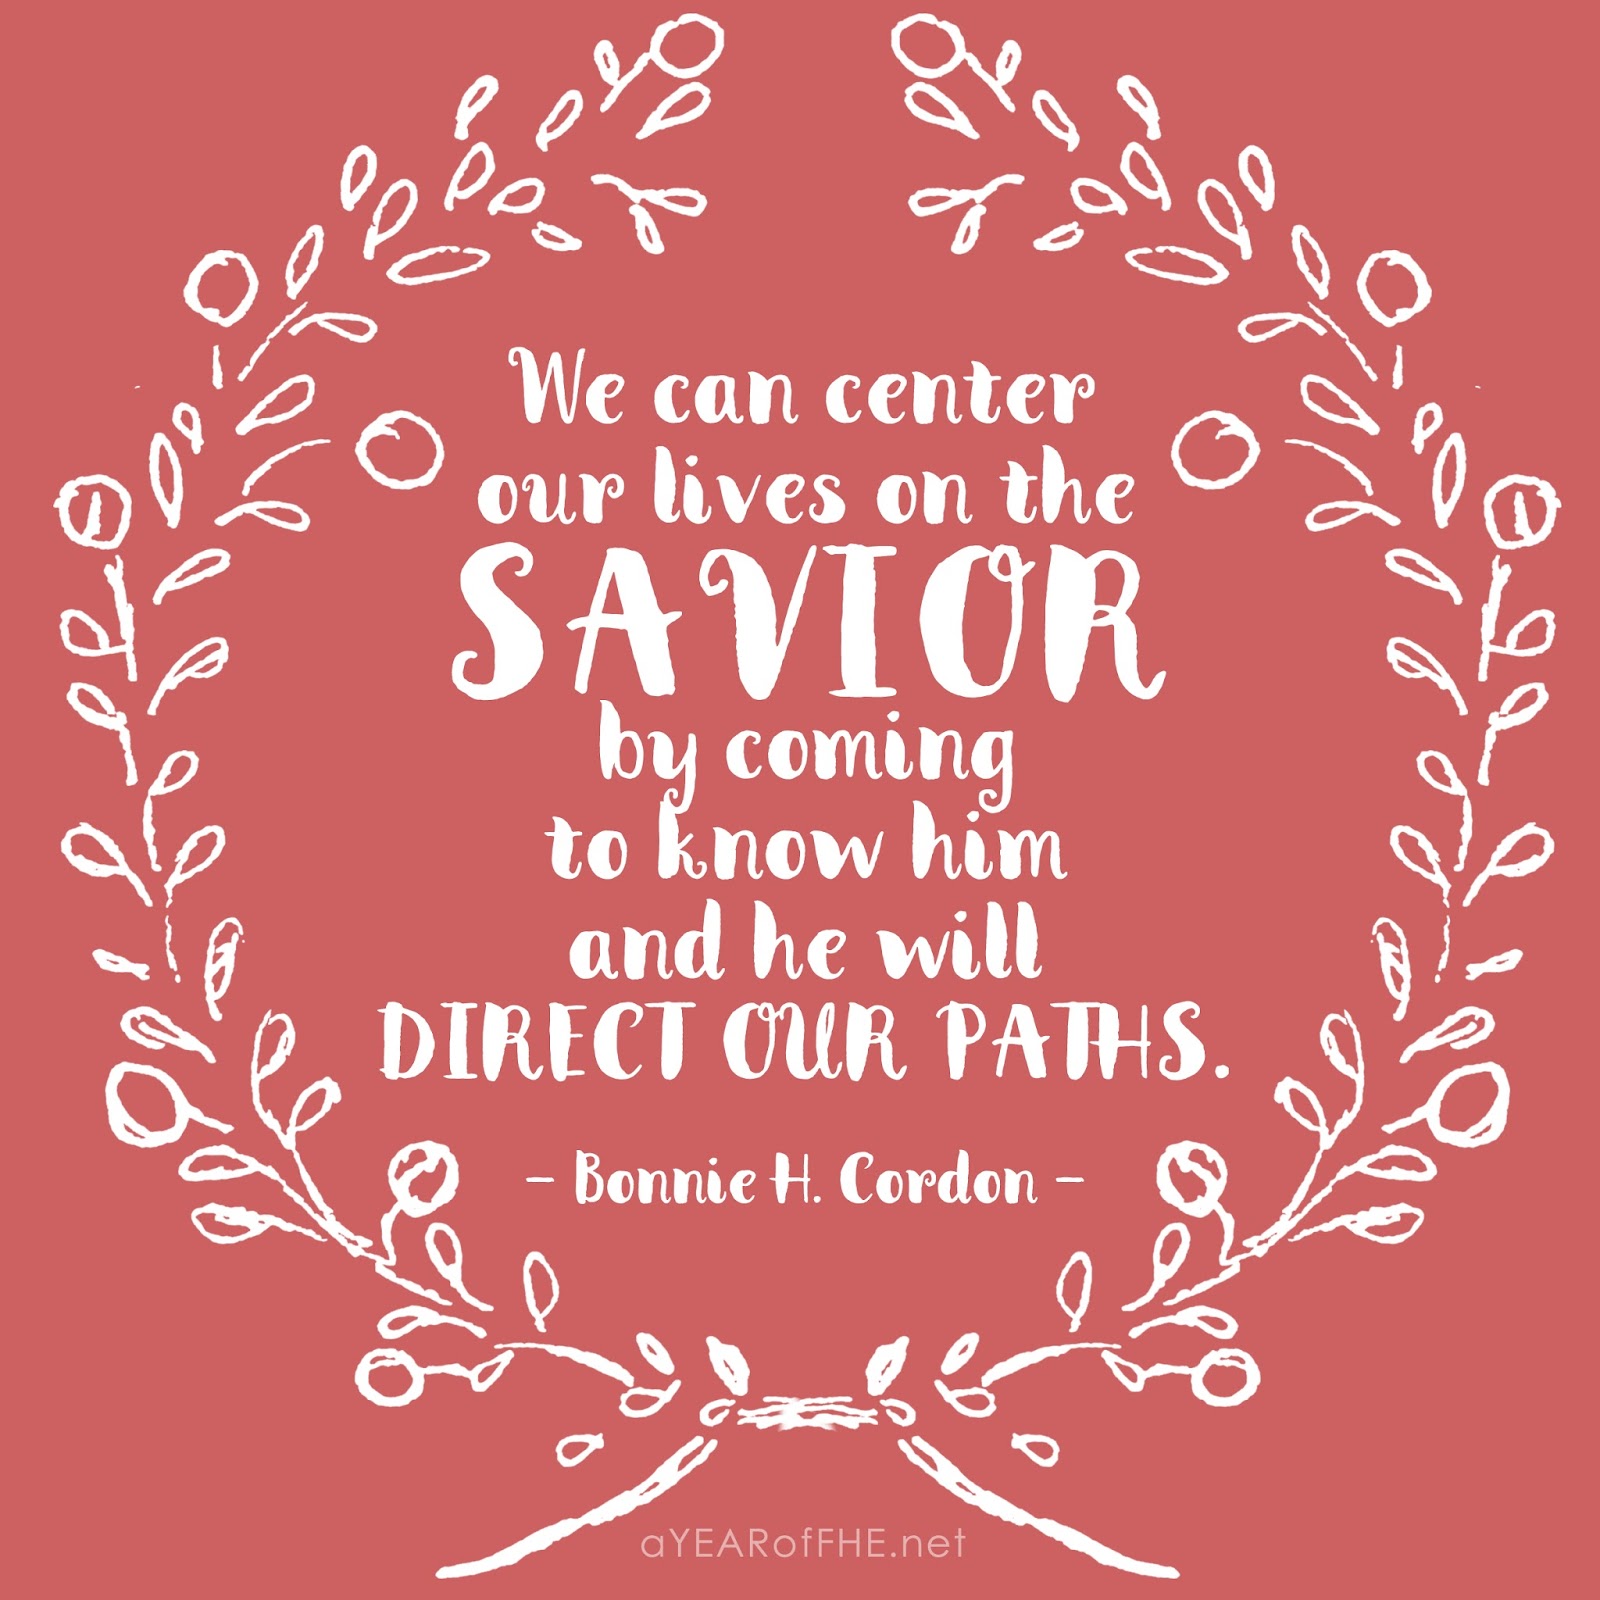 A Year of FHE // Quote from the LDS General Conference Women's Session - March 2017